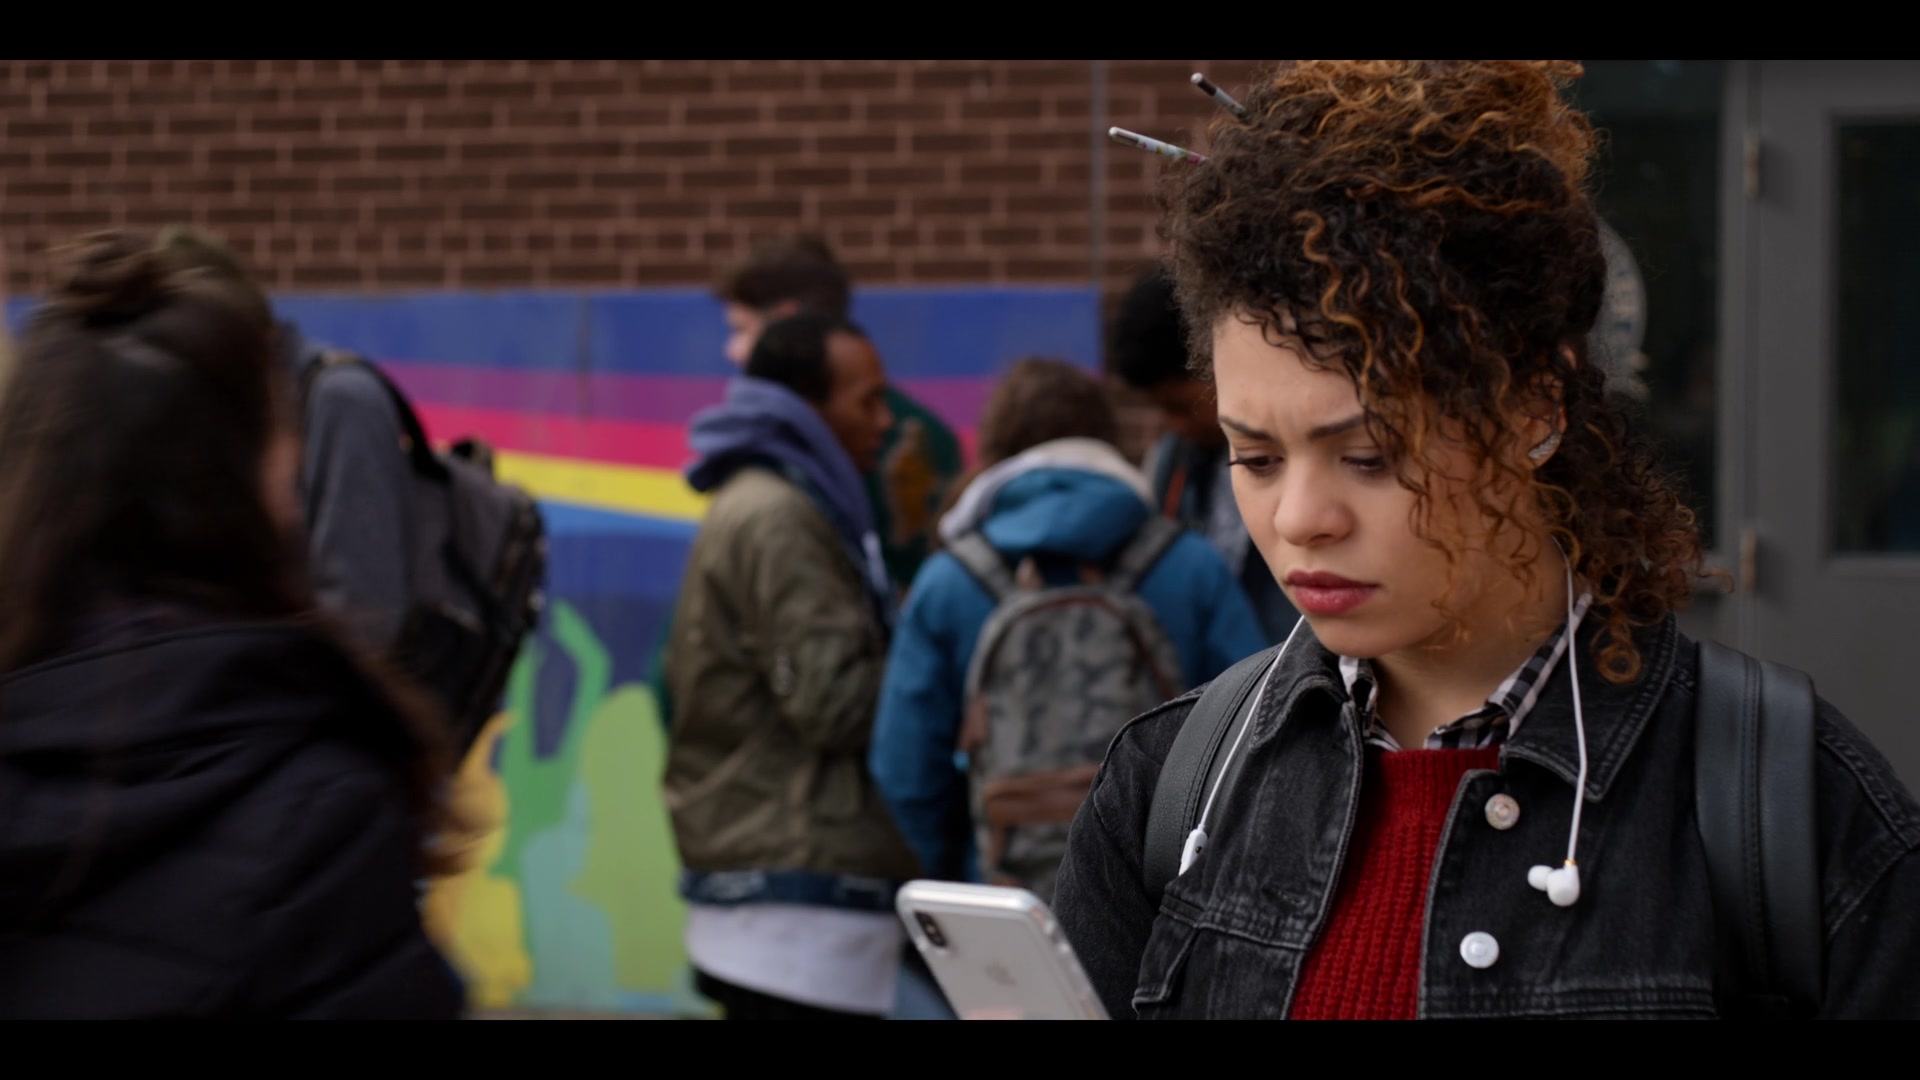 2020, I analyzed a TV Show and spotted product placement: Apple iPhone Smar...